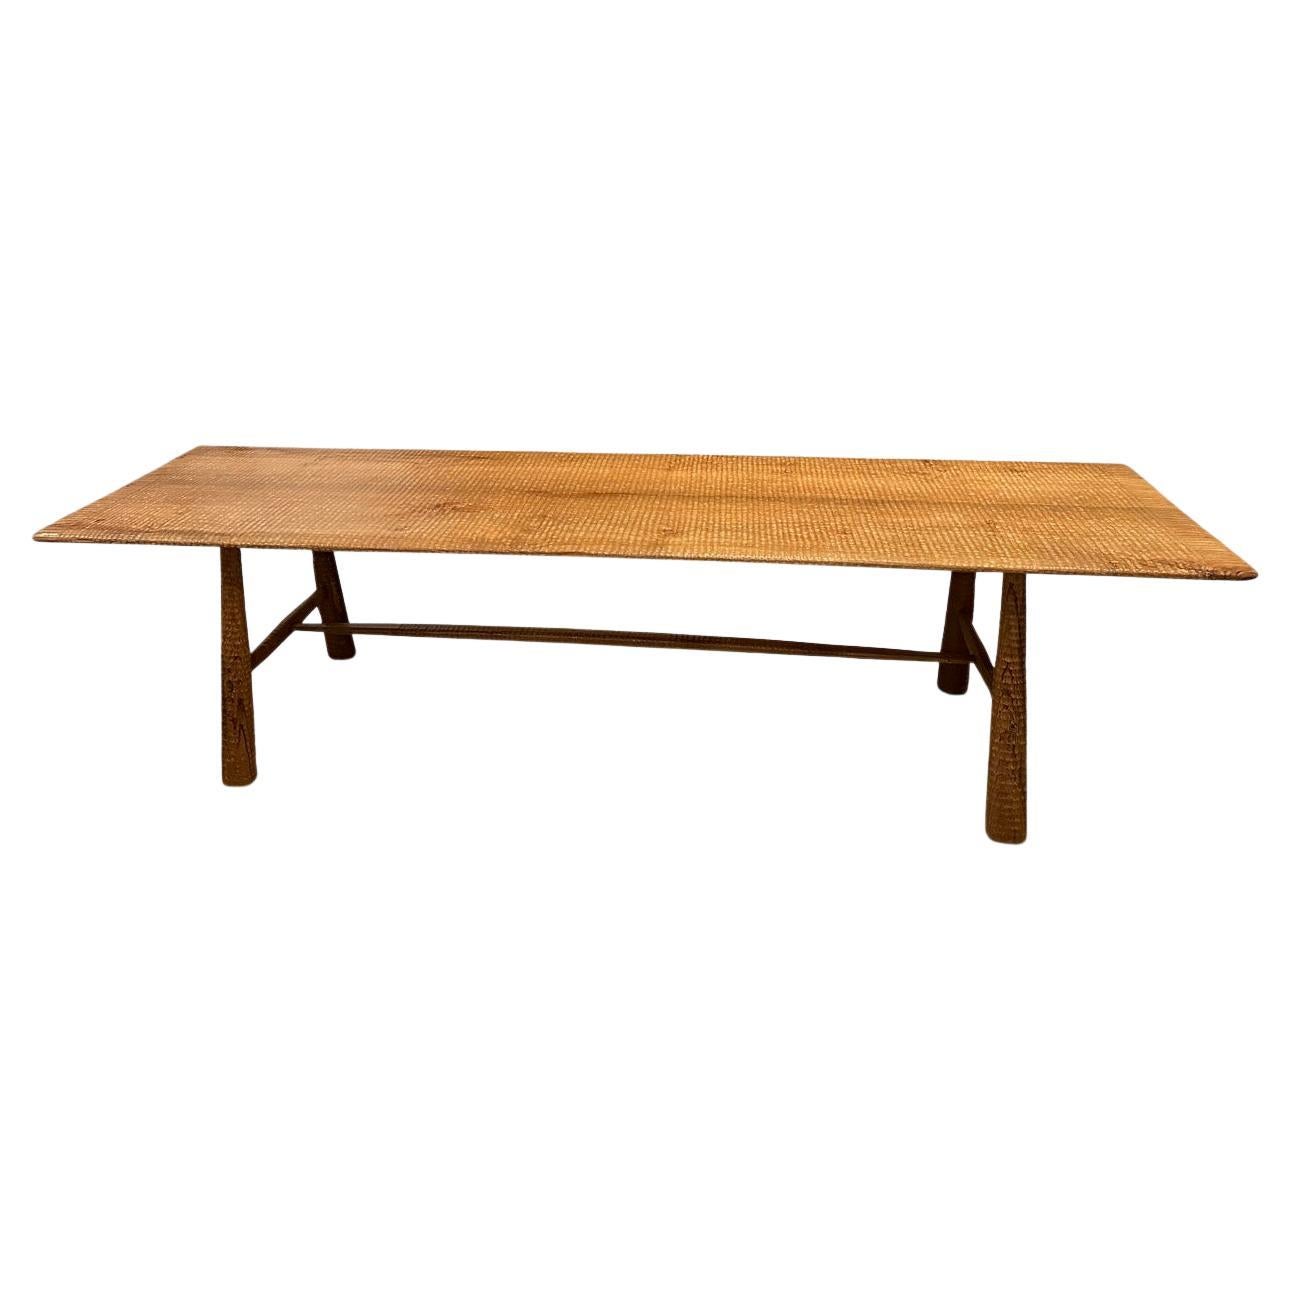 Andrianna Shamaris Impressive Hand Carved Teak Wood Dining Table or Console